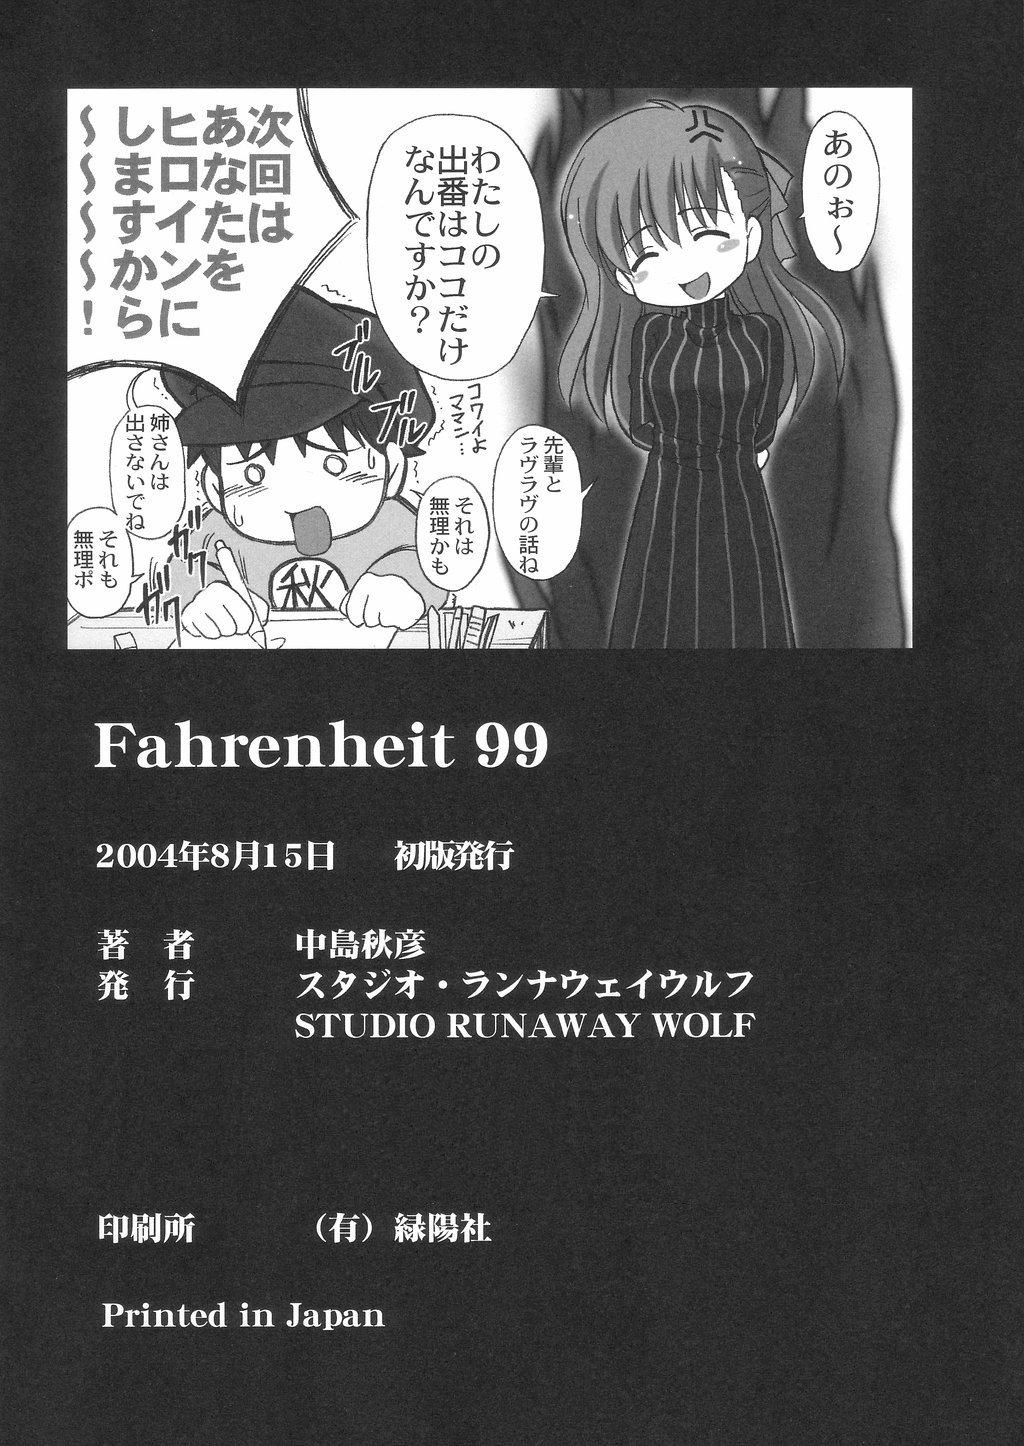 Stroking Fahrenheit 99 - Fate stay night Japan - Page 33